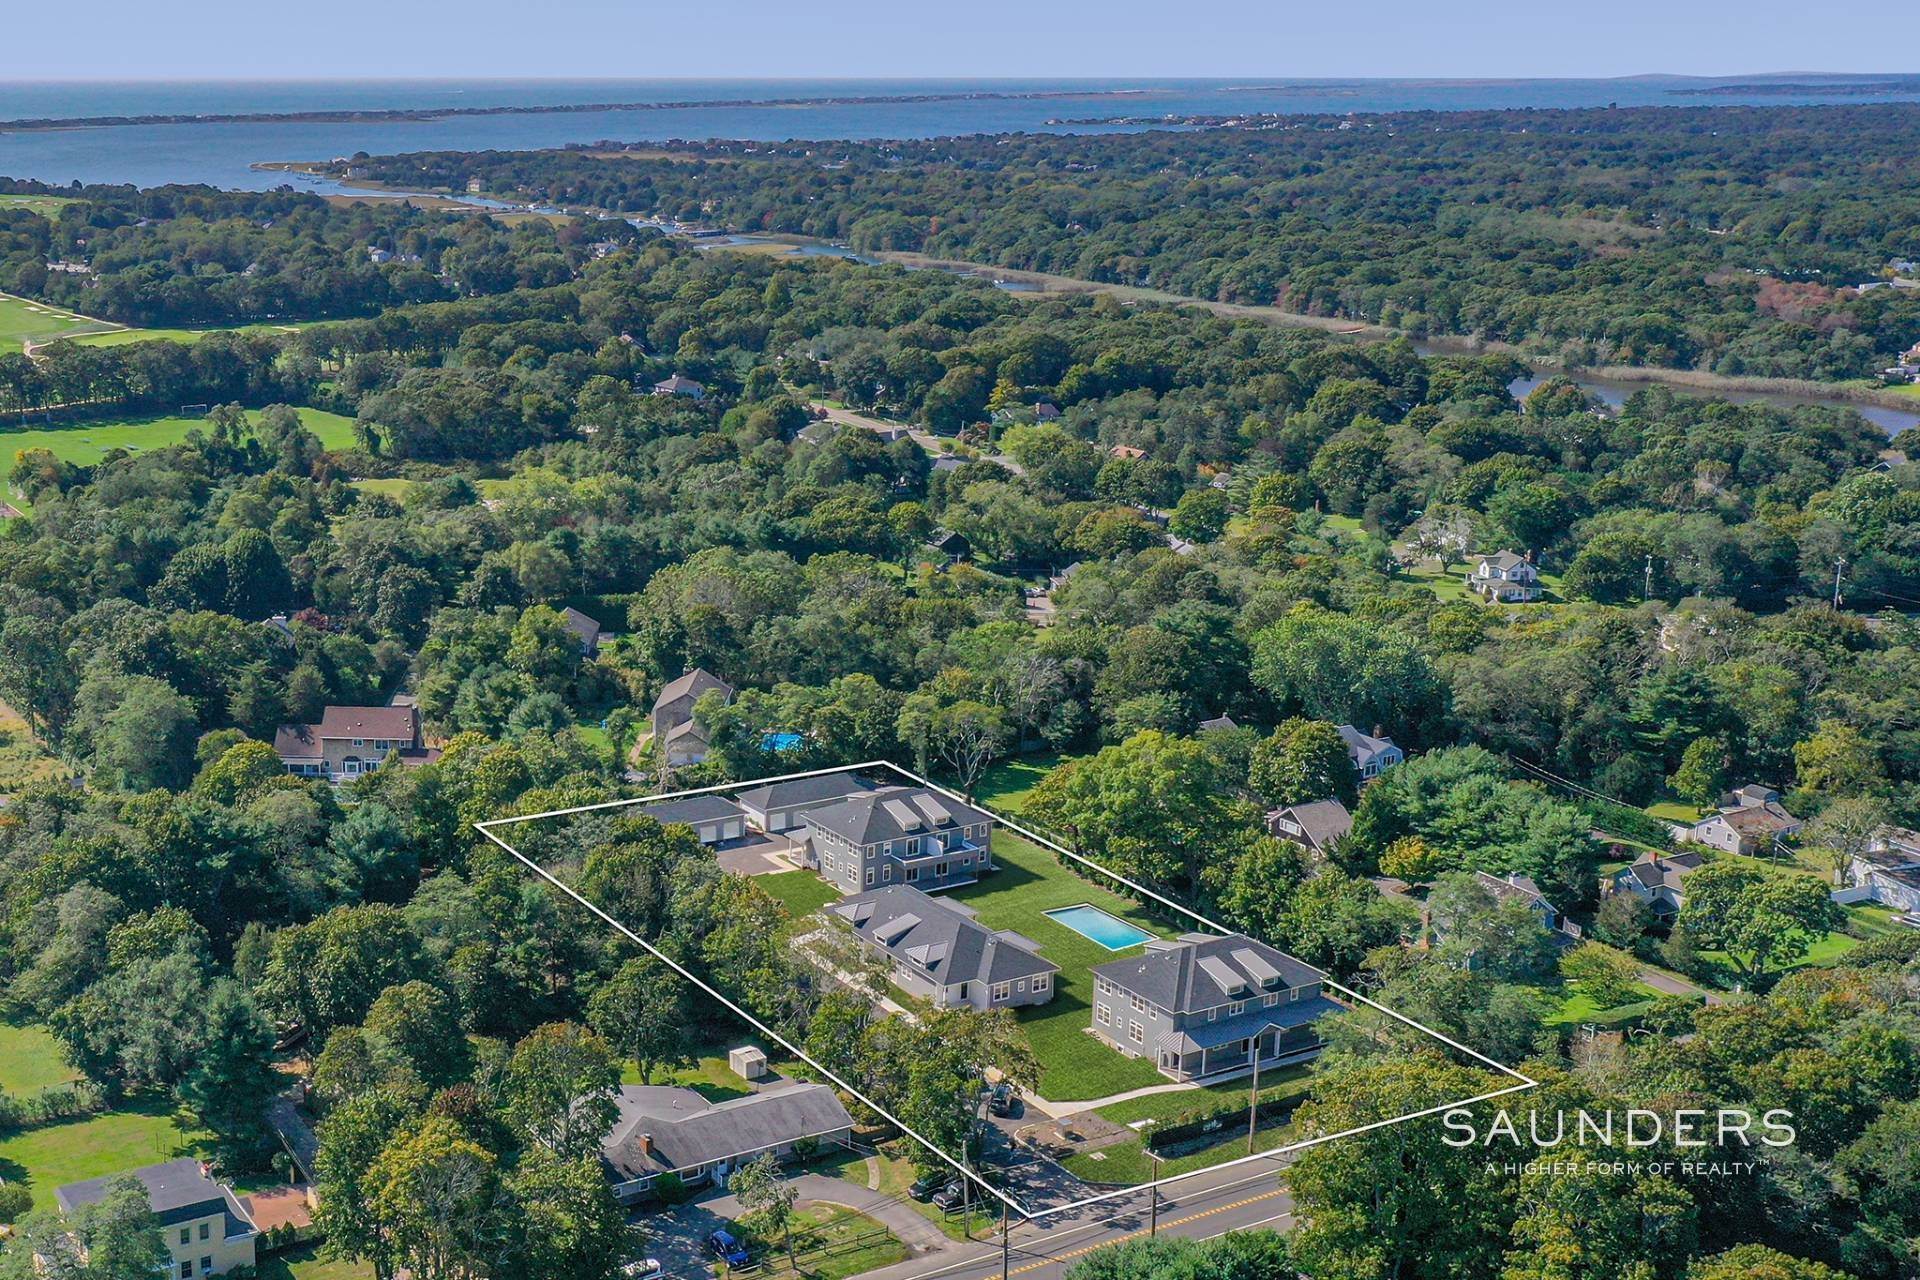 1. Townhouse for Sale at The Enclave - Westhampton 19 Montauk Highway, Unit 2, Westhampton, NY 11977